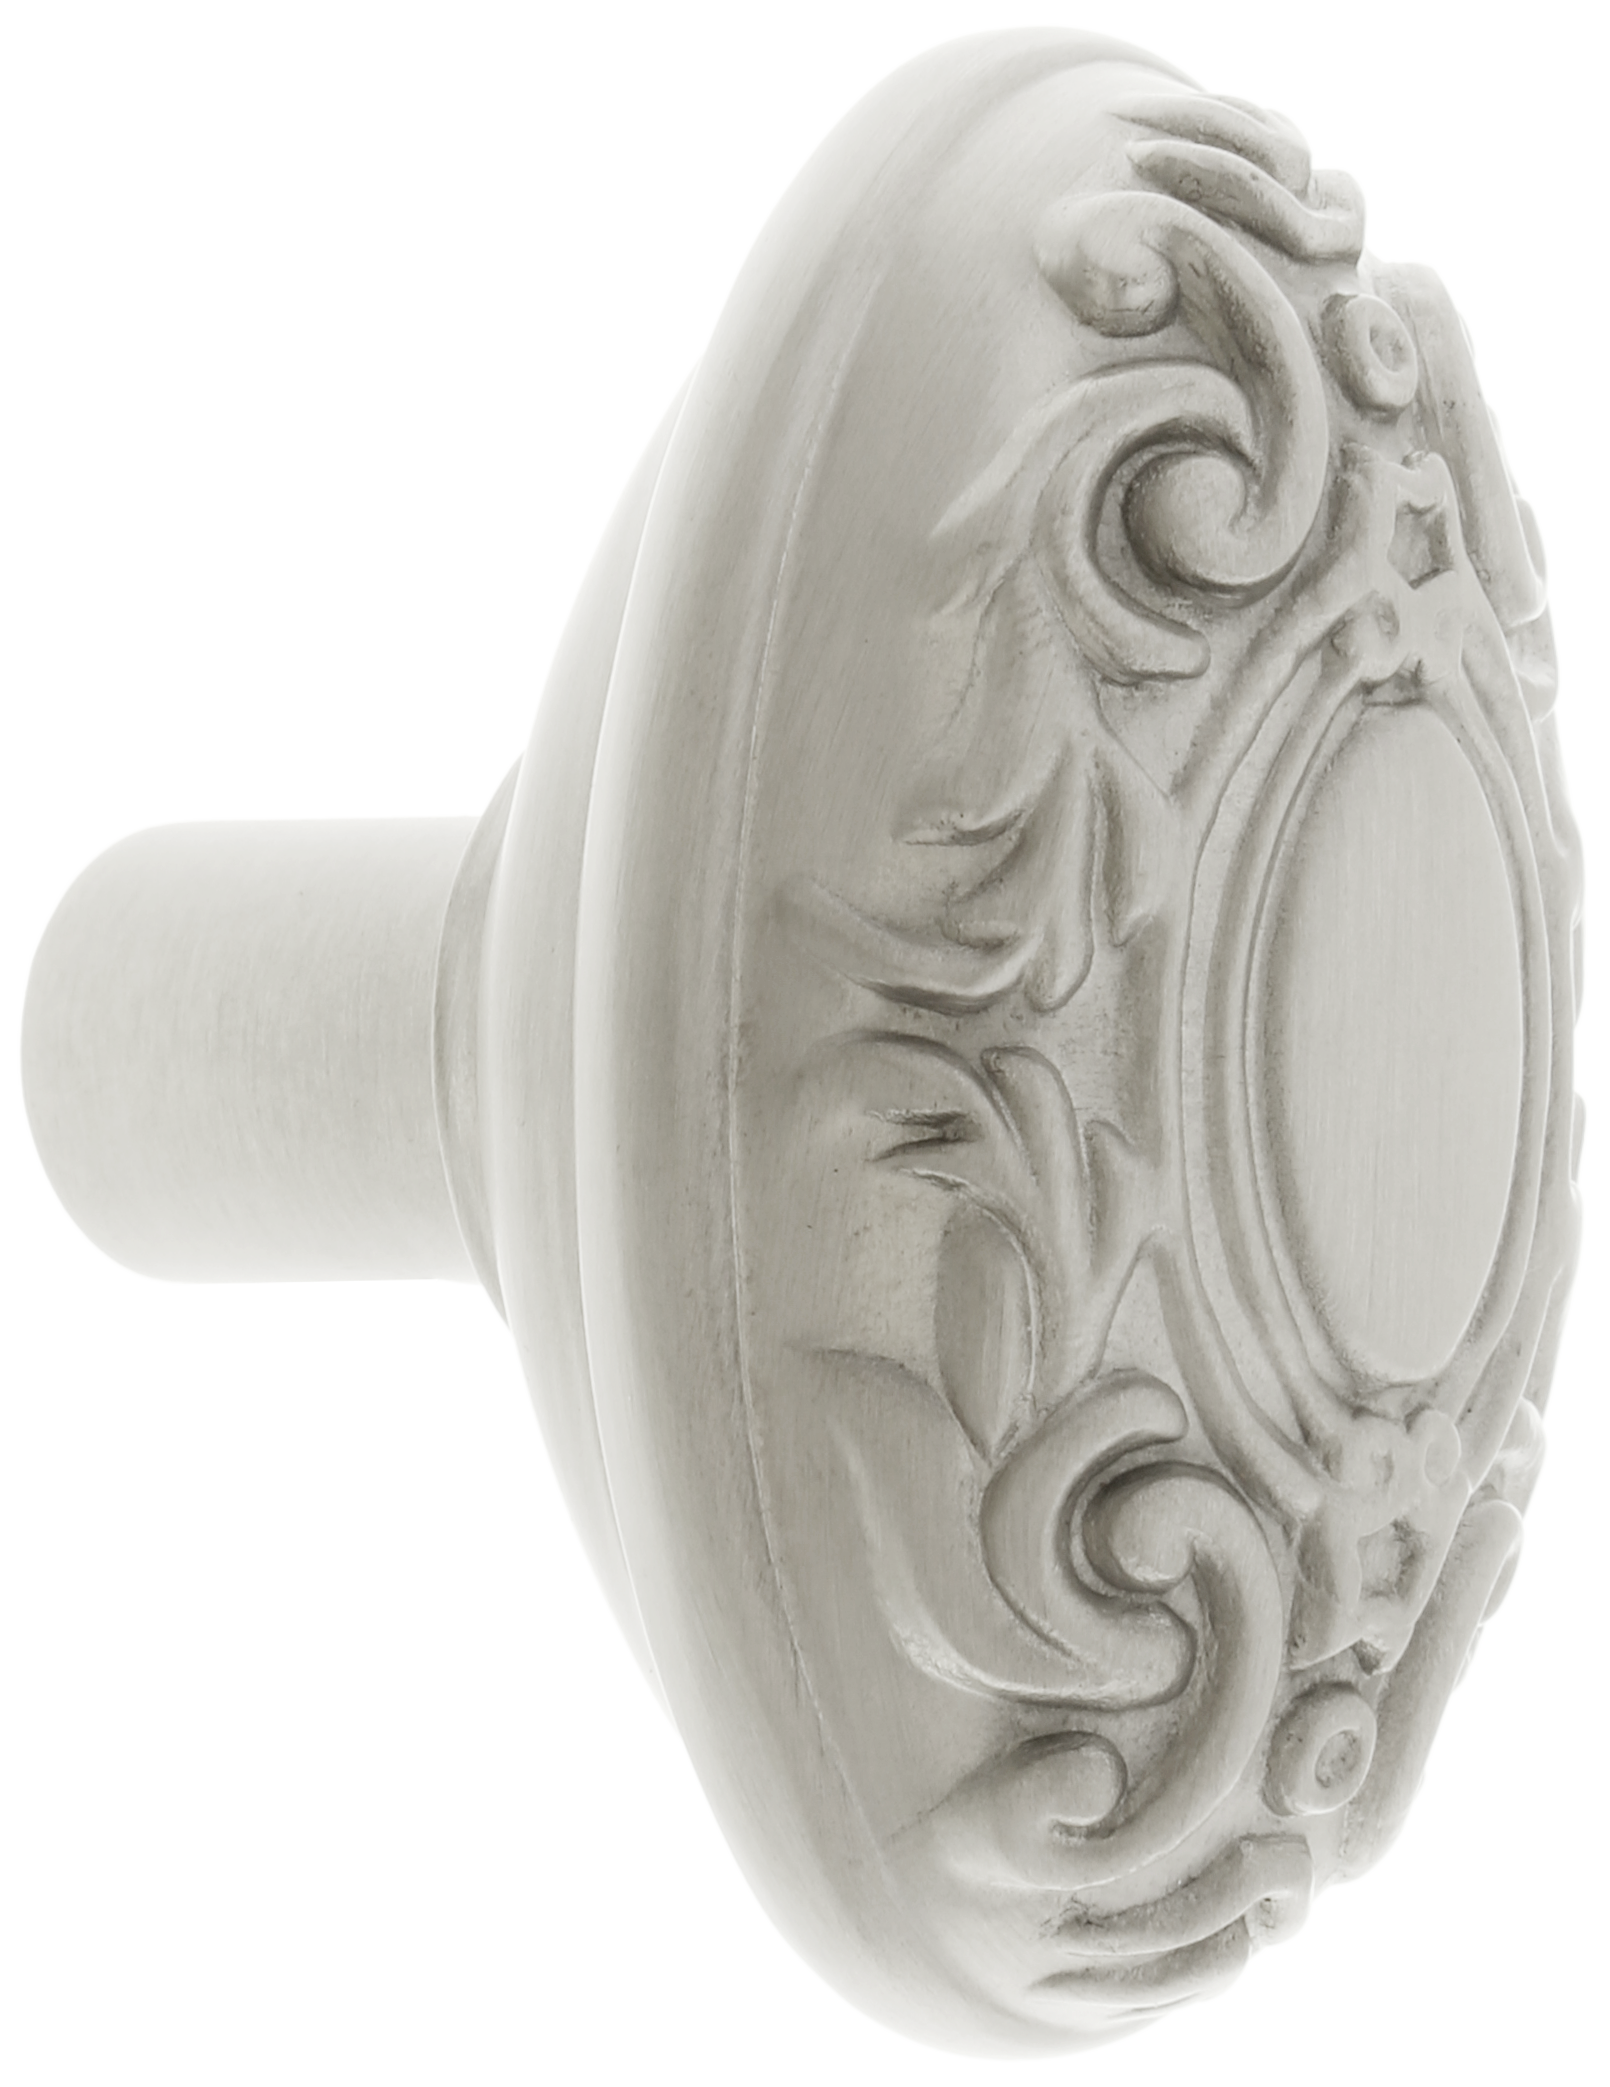 Alternate View 4 LGPNG of Pair of Oval Victorian Door Knobs In Solid Brass.